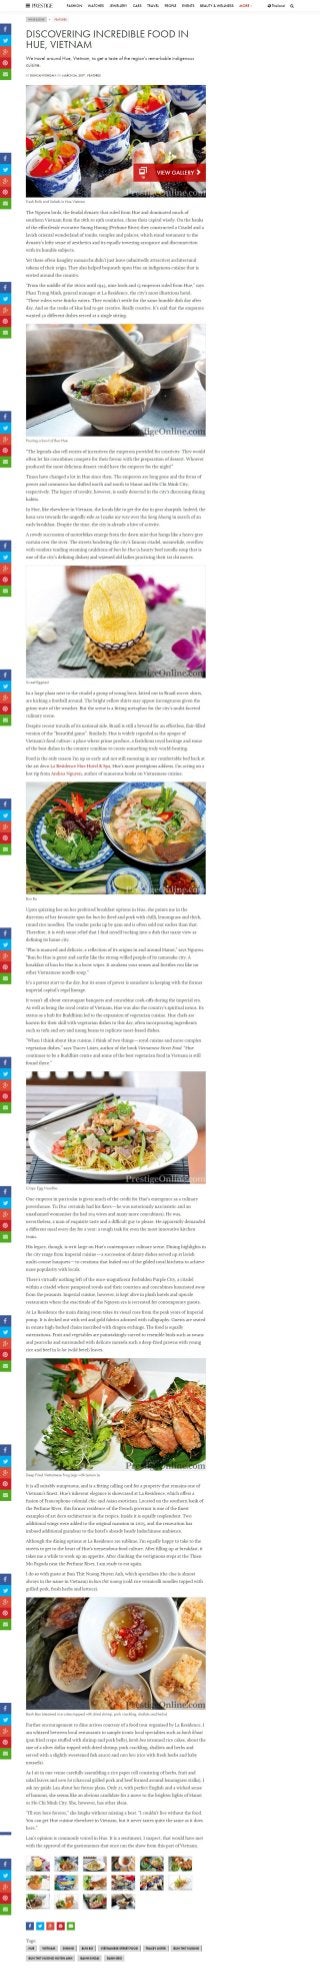 Discovering Incredible Food in Hue, Vietnam & Sampling Some of The Best Dishes at La Residence Hue, Prestige Magazine